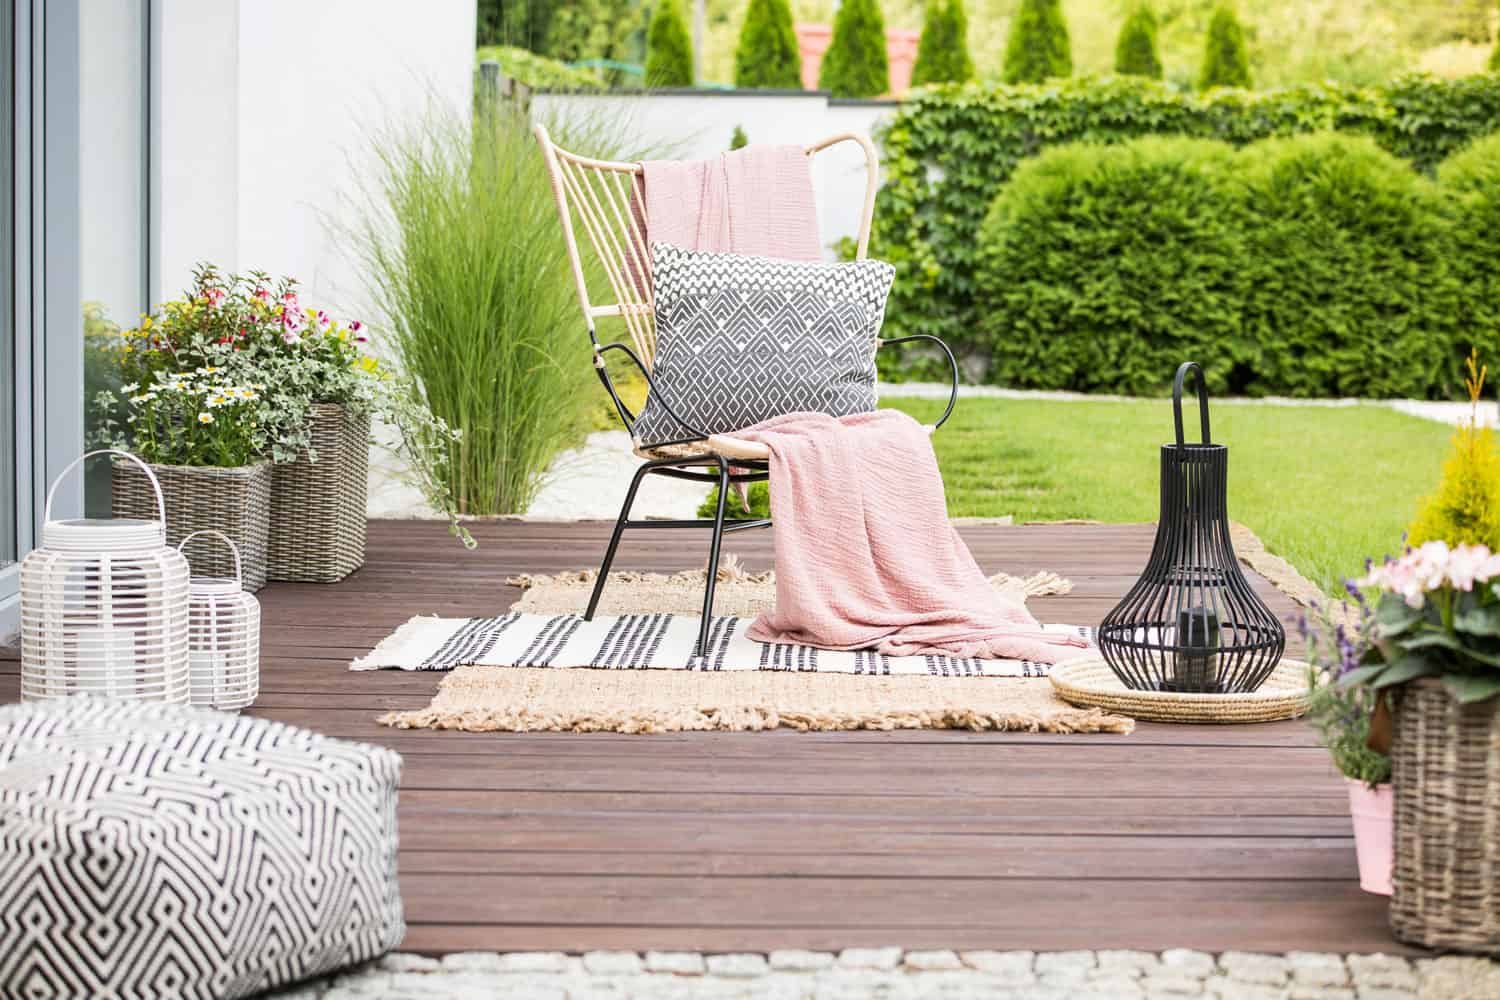 A chair on the backyard porch with a pink blankets and pillows for relaxation